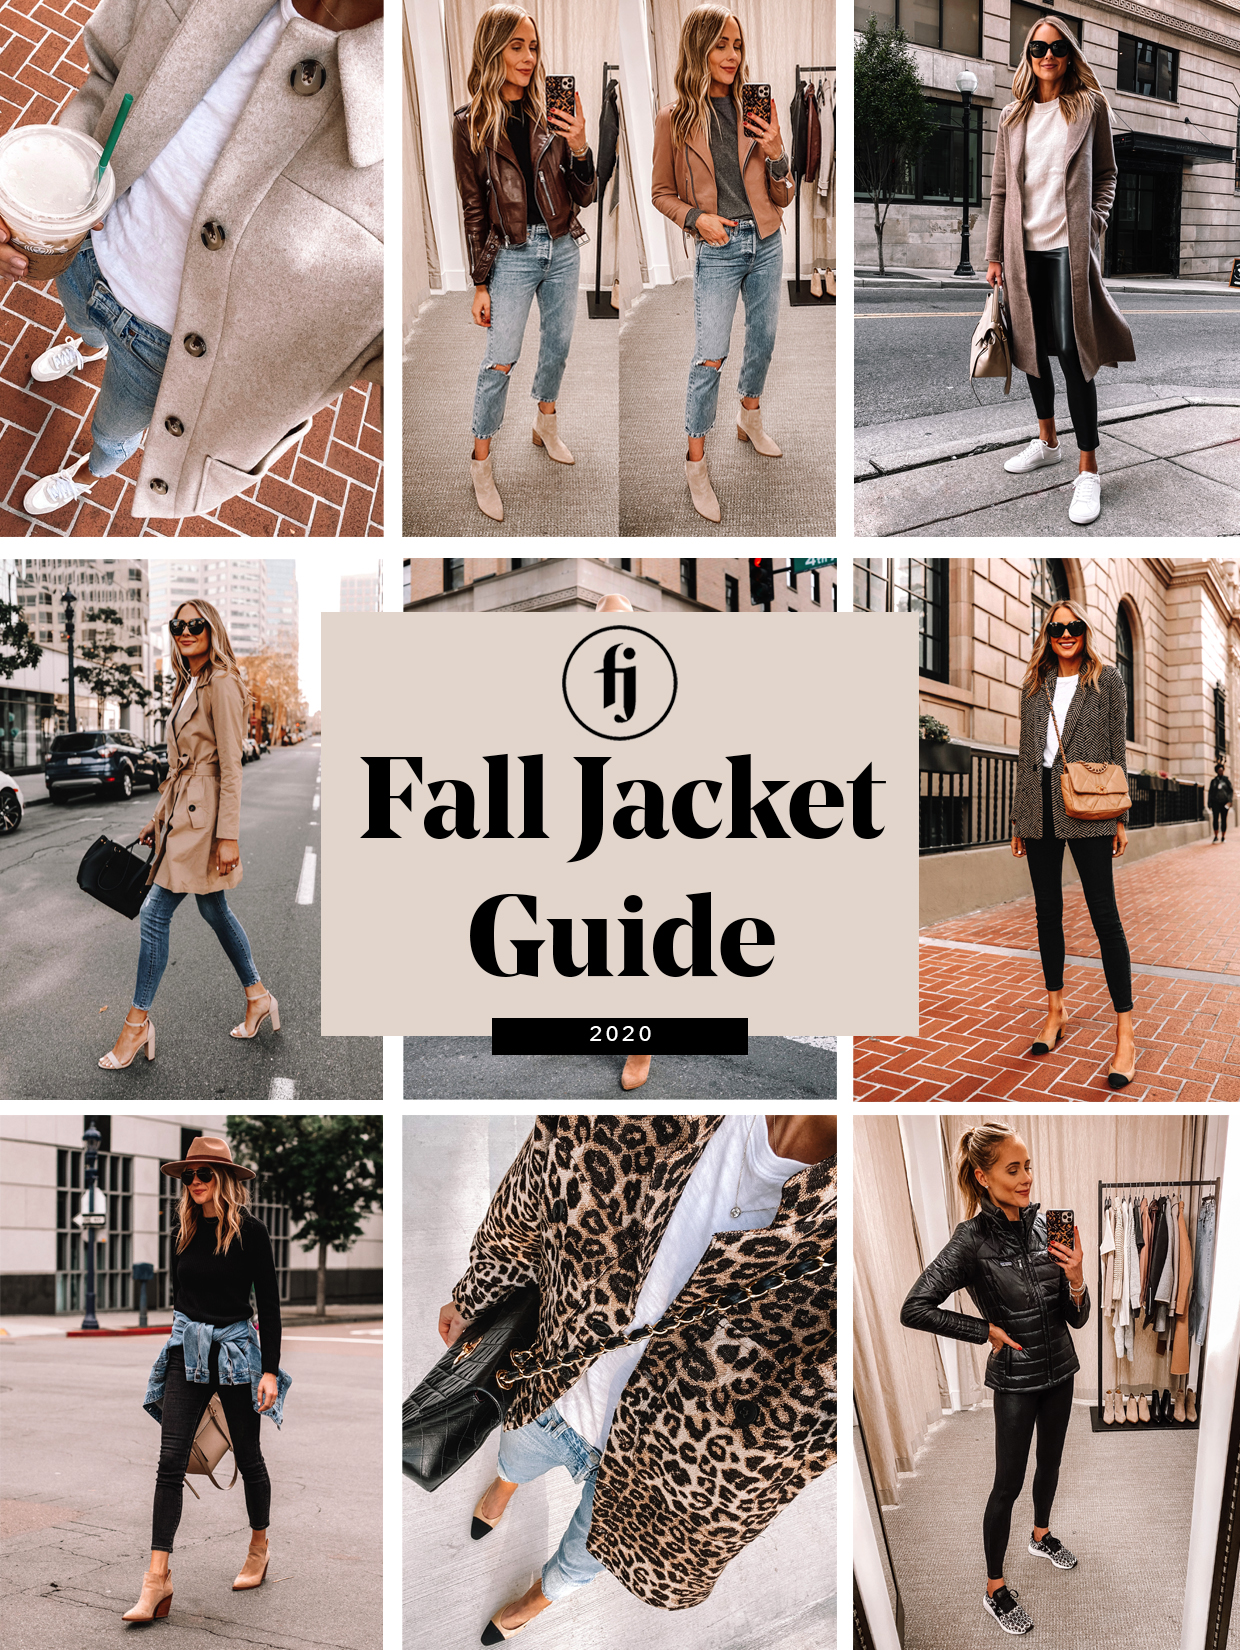 Style Guide: Eye-Catching Coats to Wear this Fall and Winter - SoCalPulse